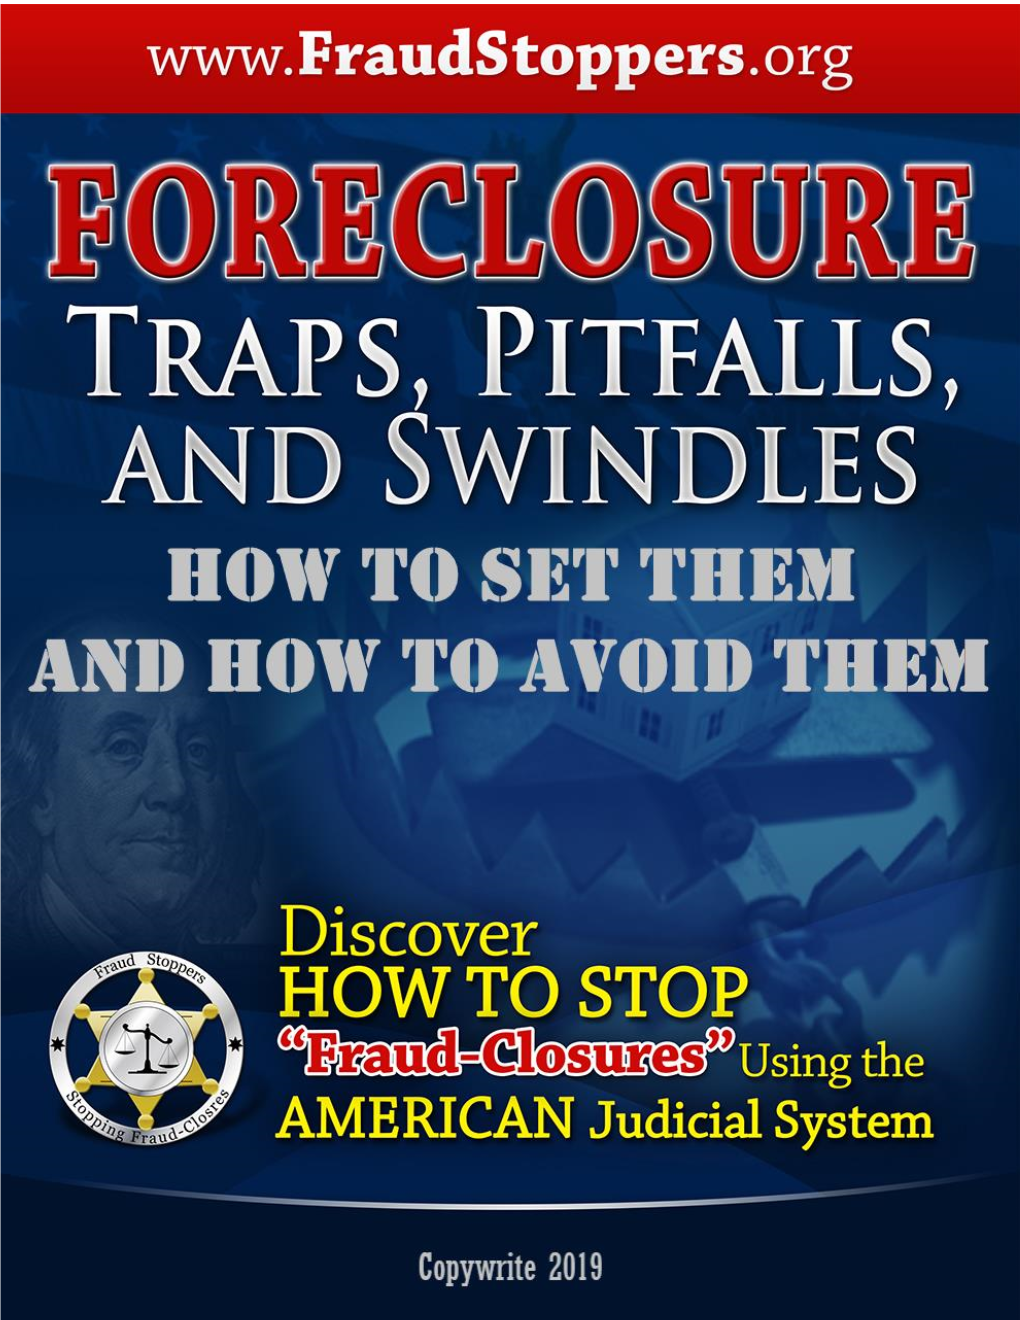 Traps, Pitfalls, and Swindles How to Set Them & How to Avoid Them